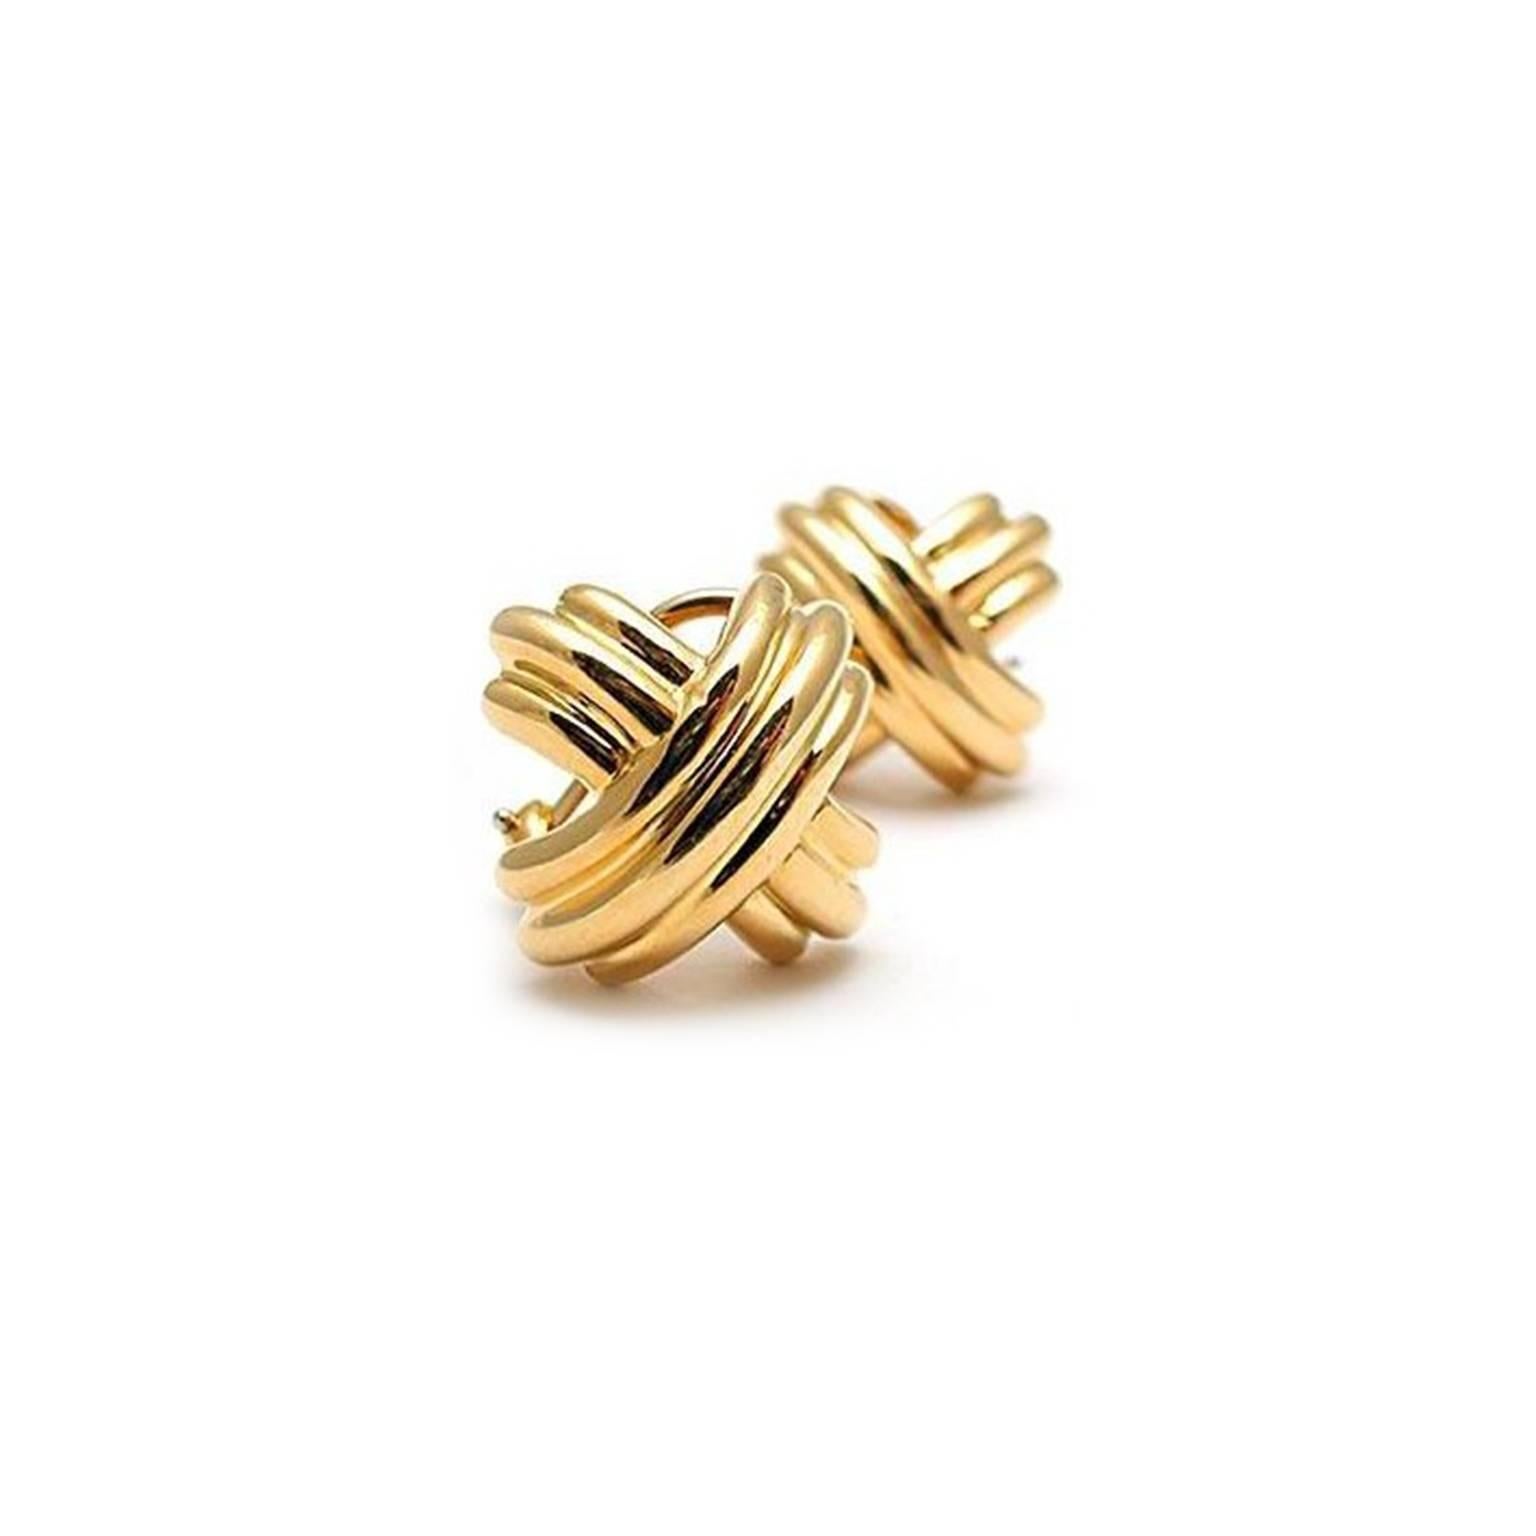 Beautiful and classic, Tiffany & Co. 18K yellow gold earrings, omega style clip backs, stamped T & Co., 750. 12.8 grams of weight. These earrings are great for everyday wear or anytime whether is casual or cocktail attire dressing. Excellent